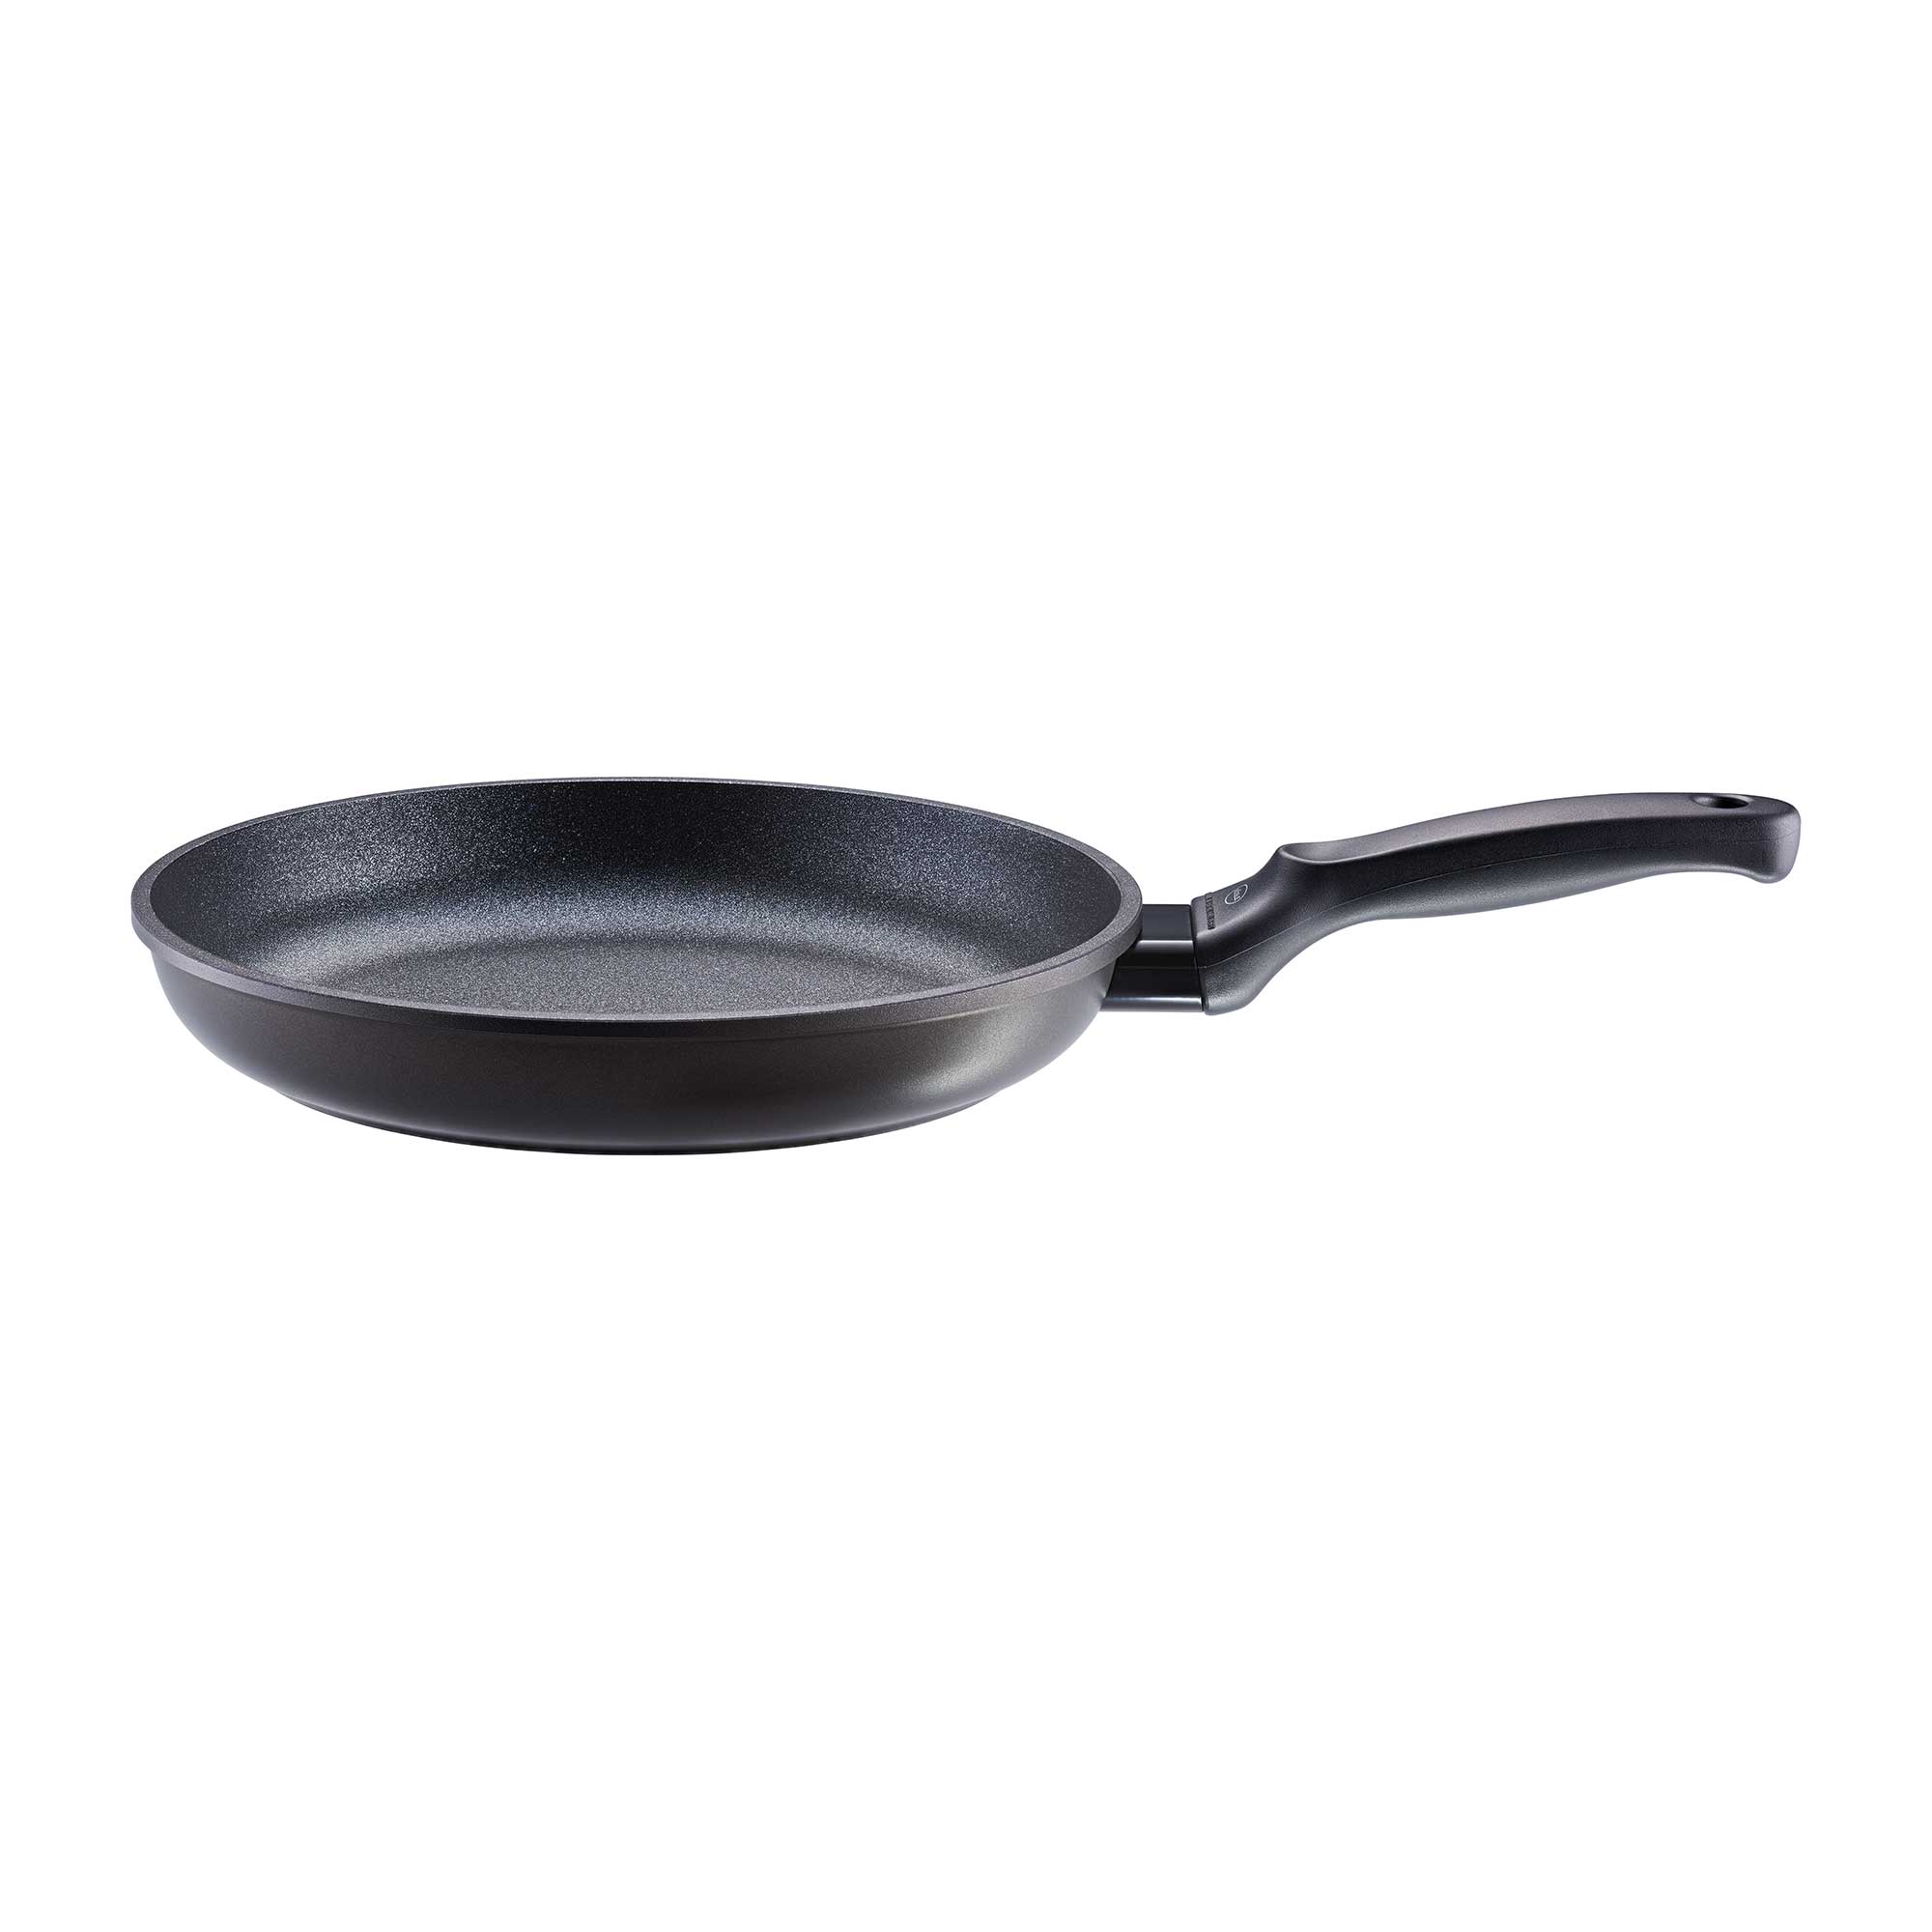 Frying Pan "Cadini" Ø 24 cm | 9.5 in. from cast aluminum with non-stick coating ProResist